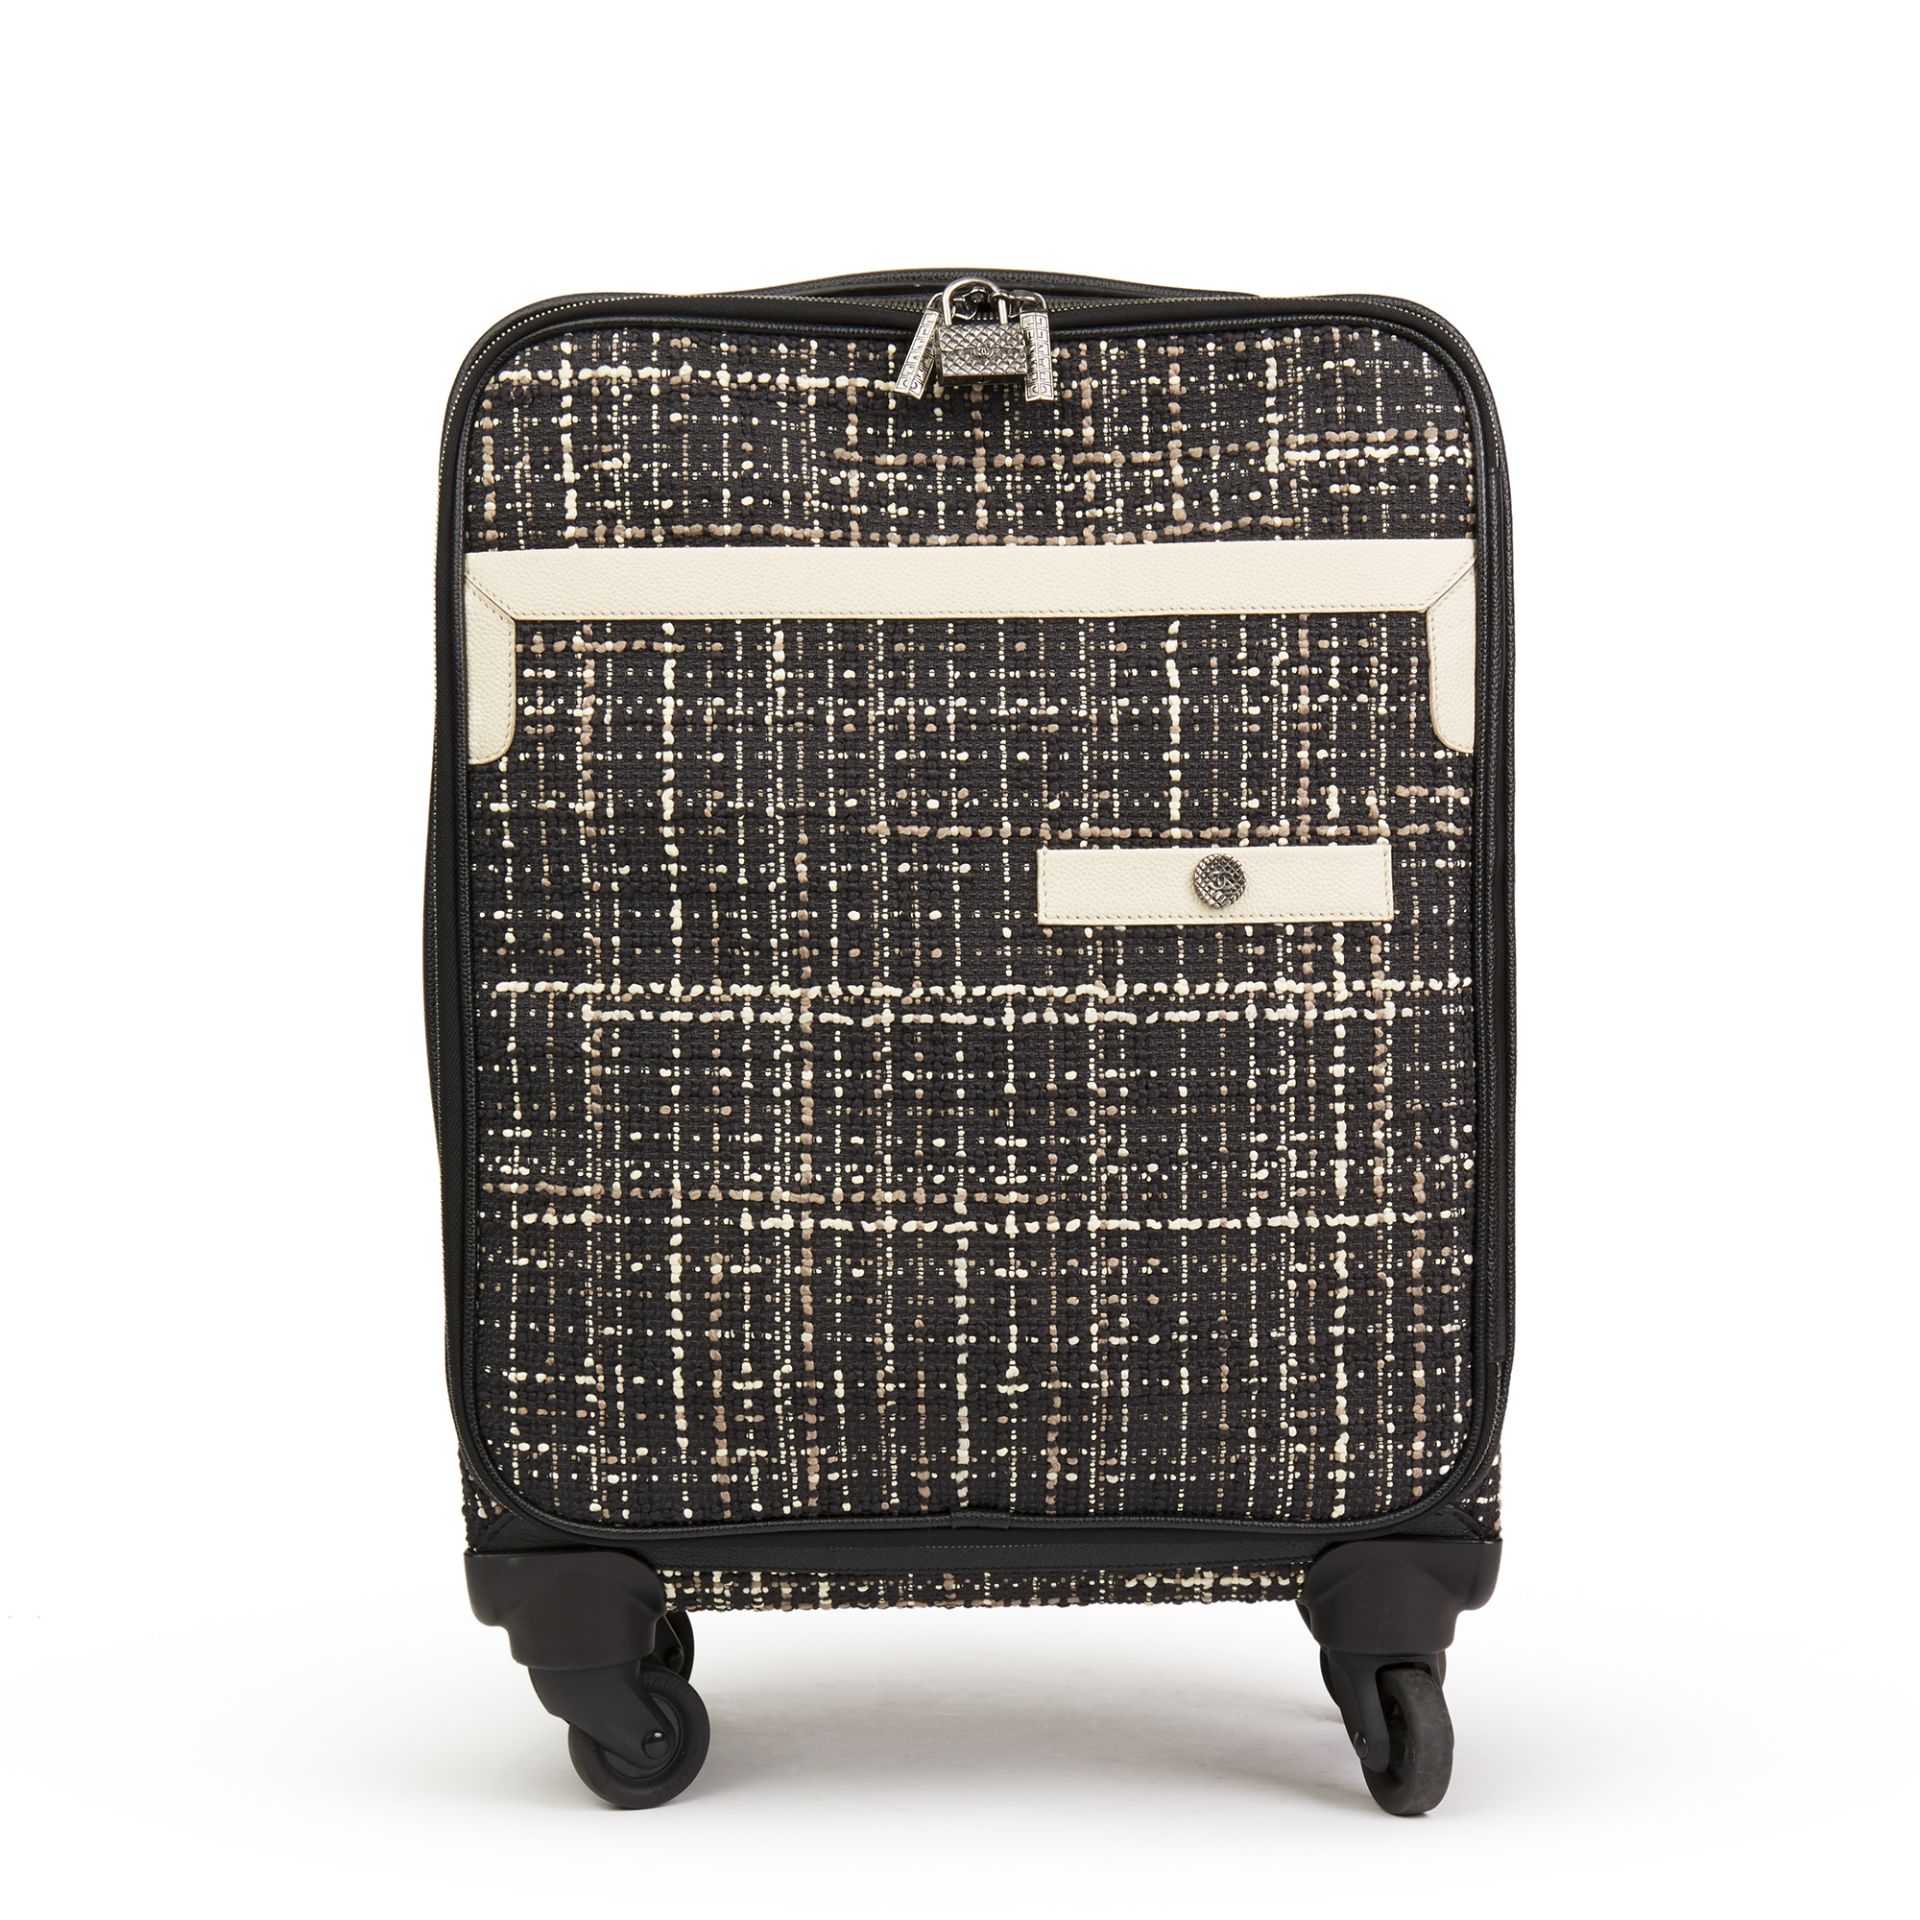 Chanel Jacket Trolley Rolling Suitcase